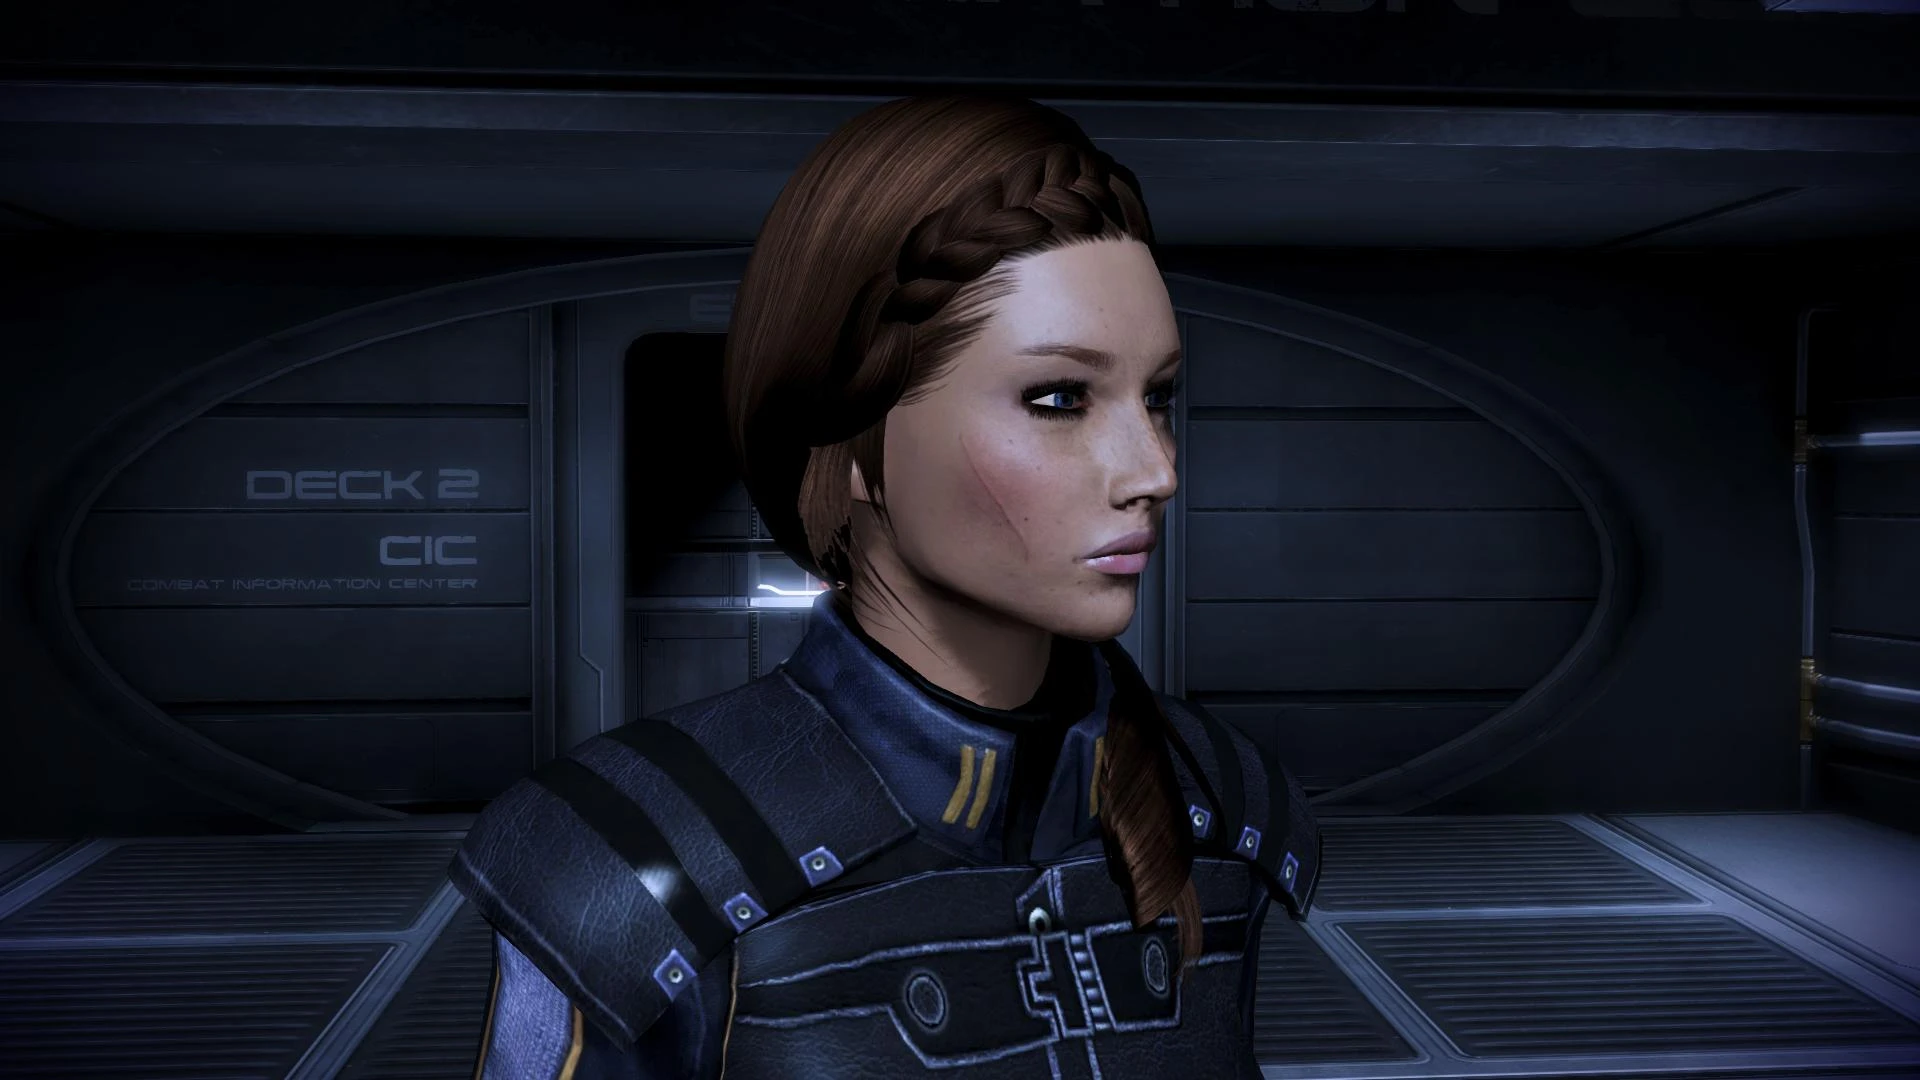 Mass effect 2 hairstyles female